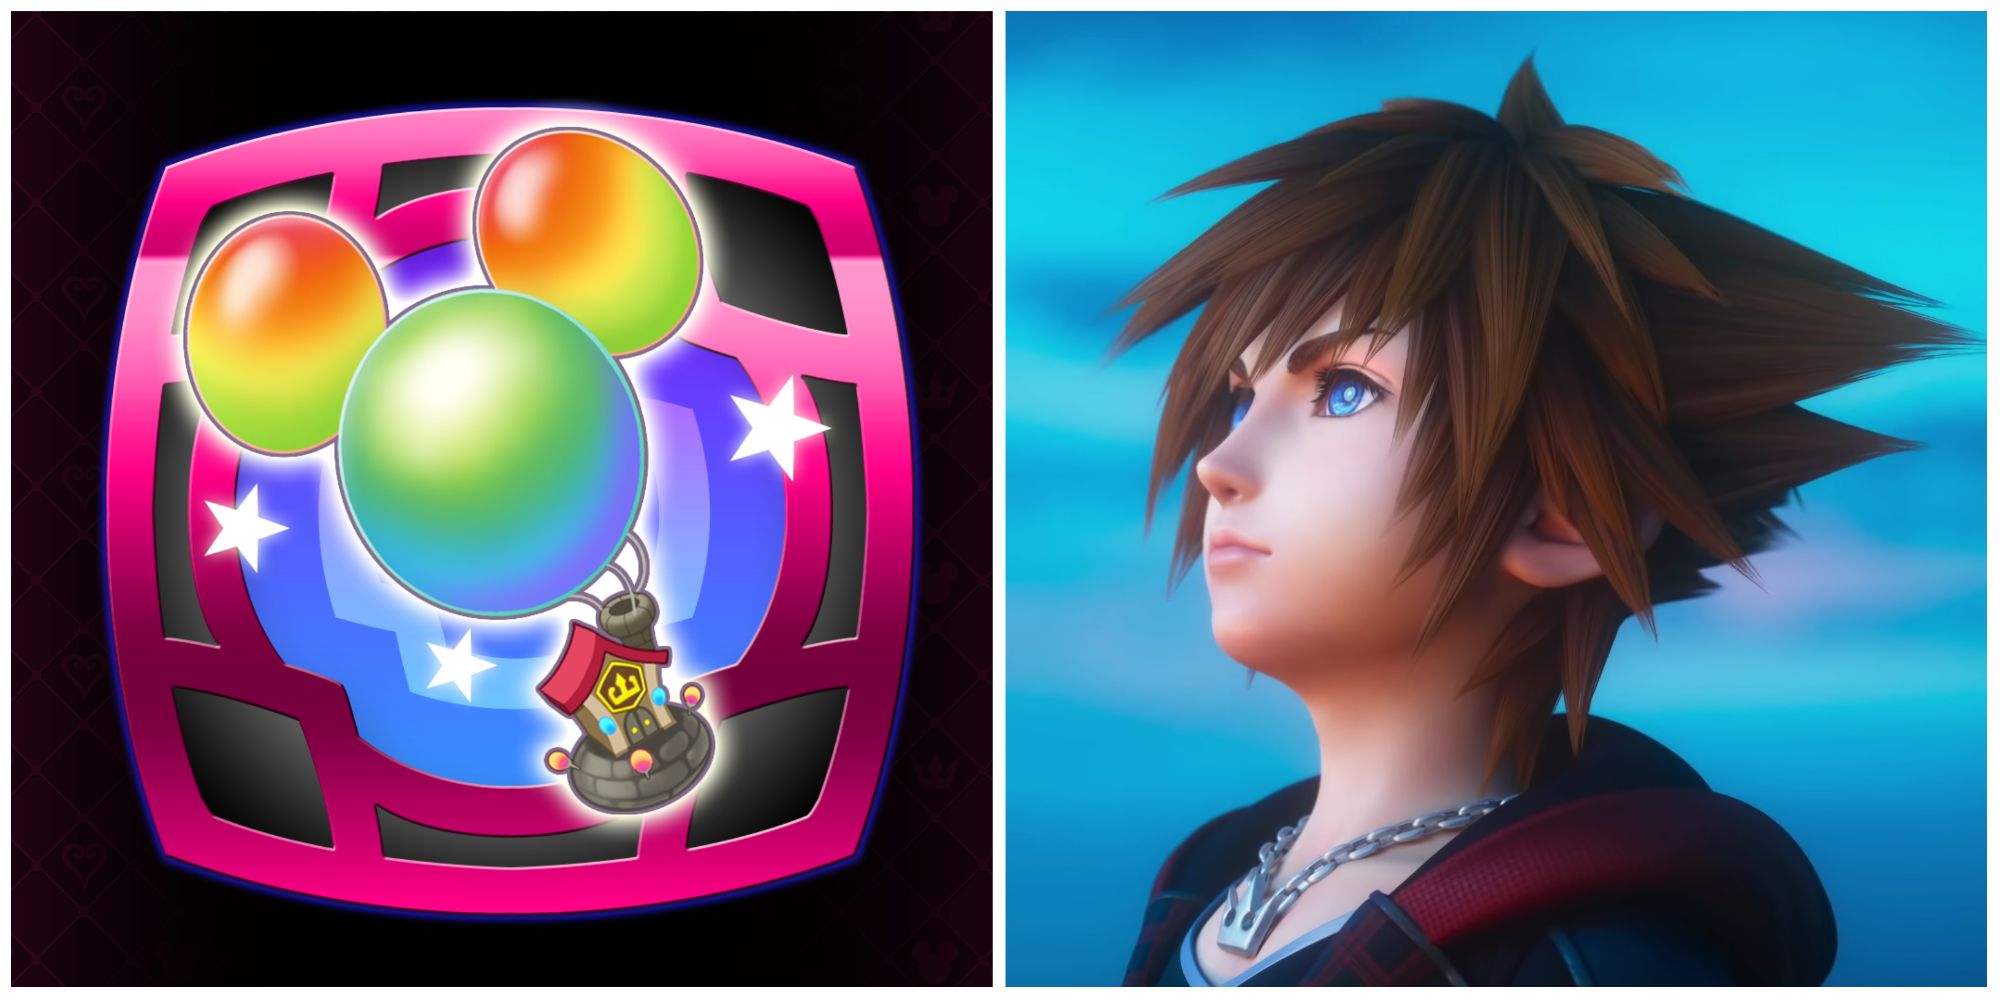 The Balloon Spell and Sora in Kingdom Hearts